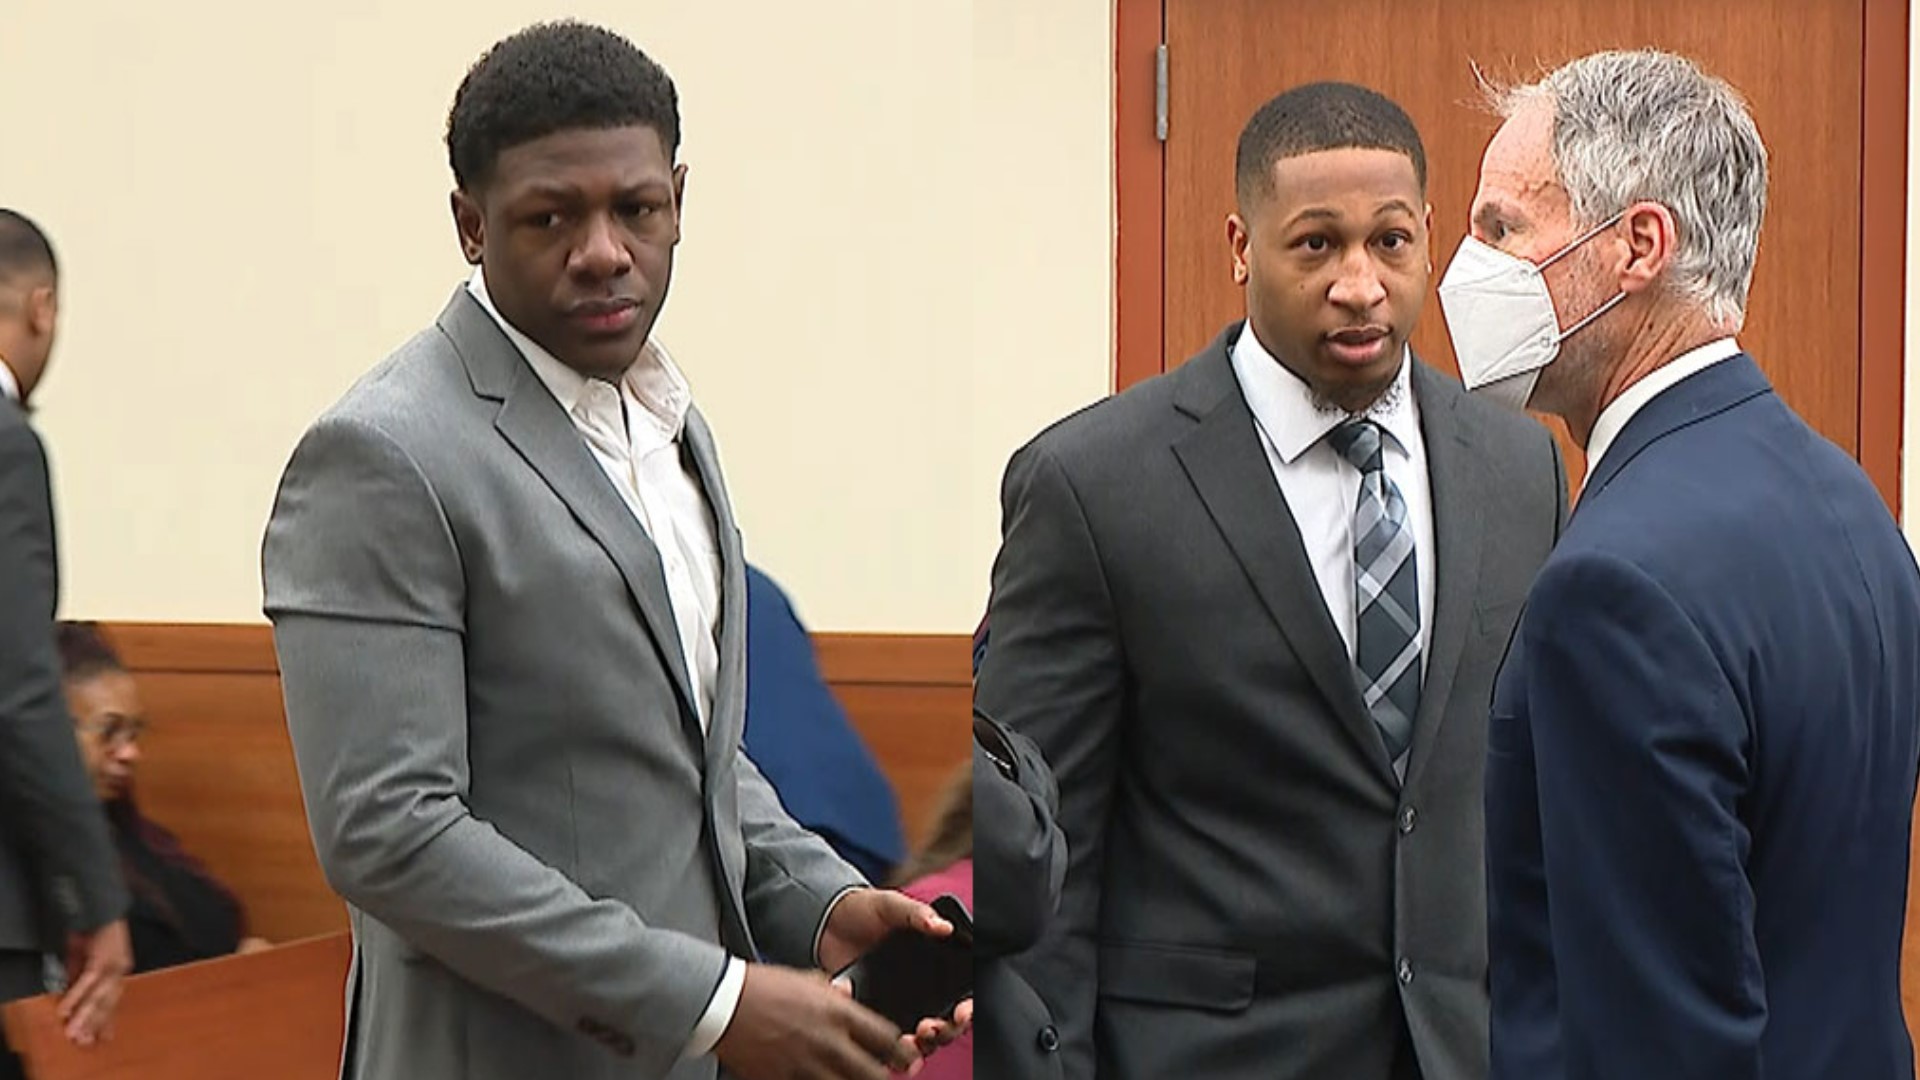 Riep Xxx Hd - Fomer Ohio State Football players found not guilty | 10tv.com